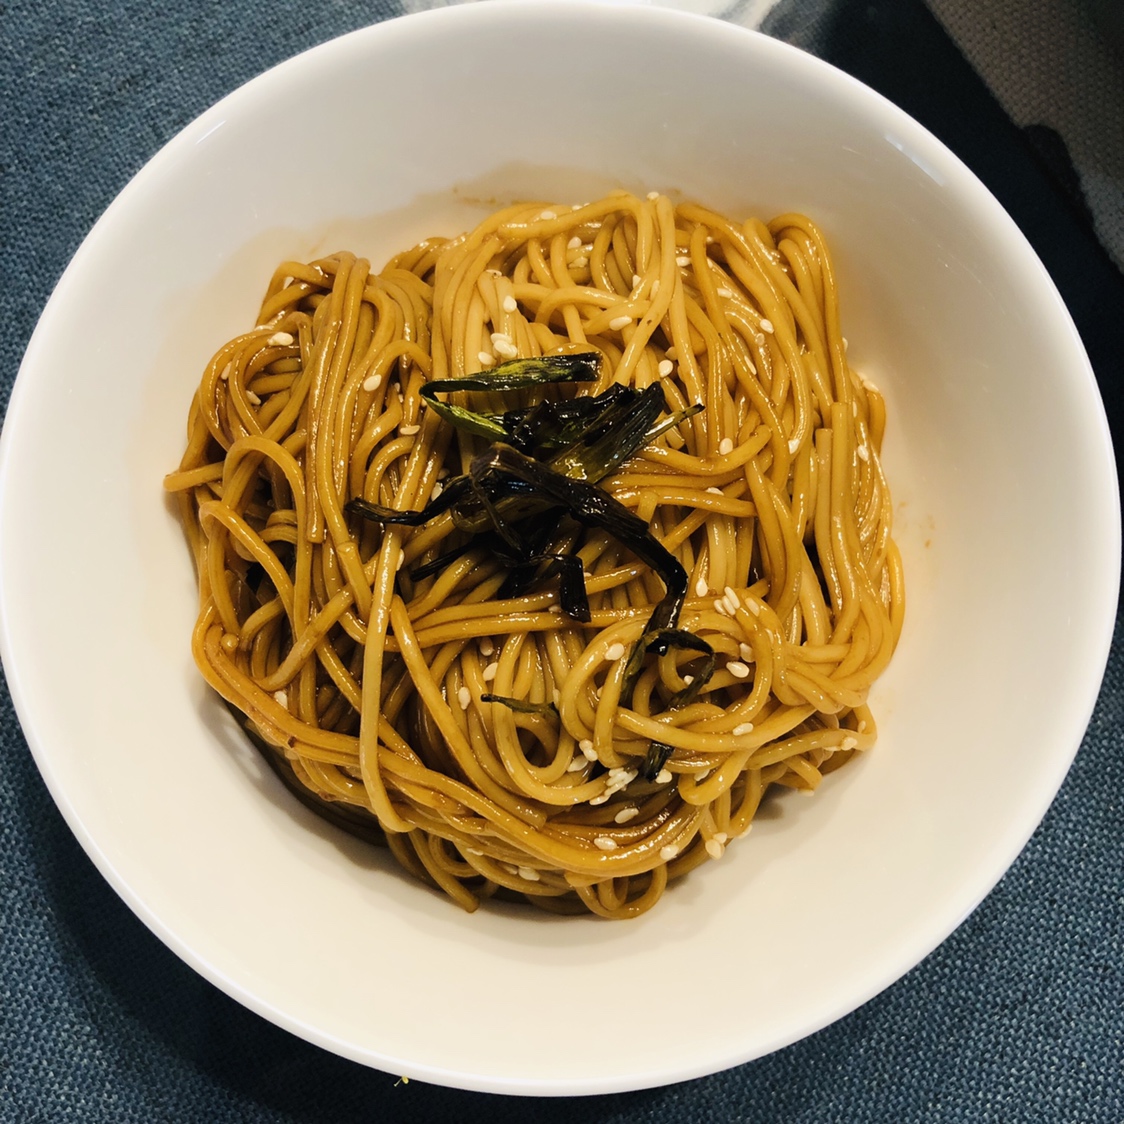 
The practice of green oily noodles served with soy sauce, how is green oily noodles served with soy sauce done delicious